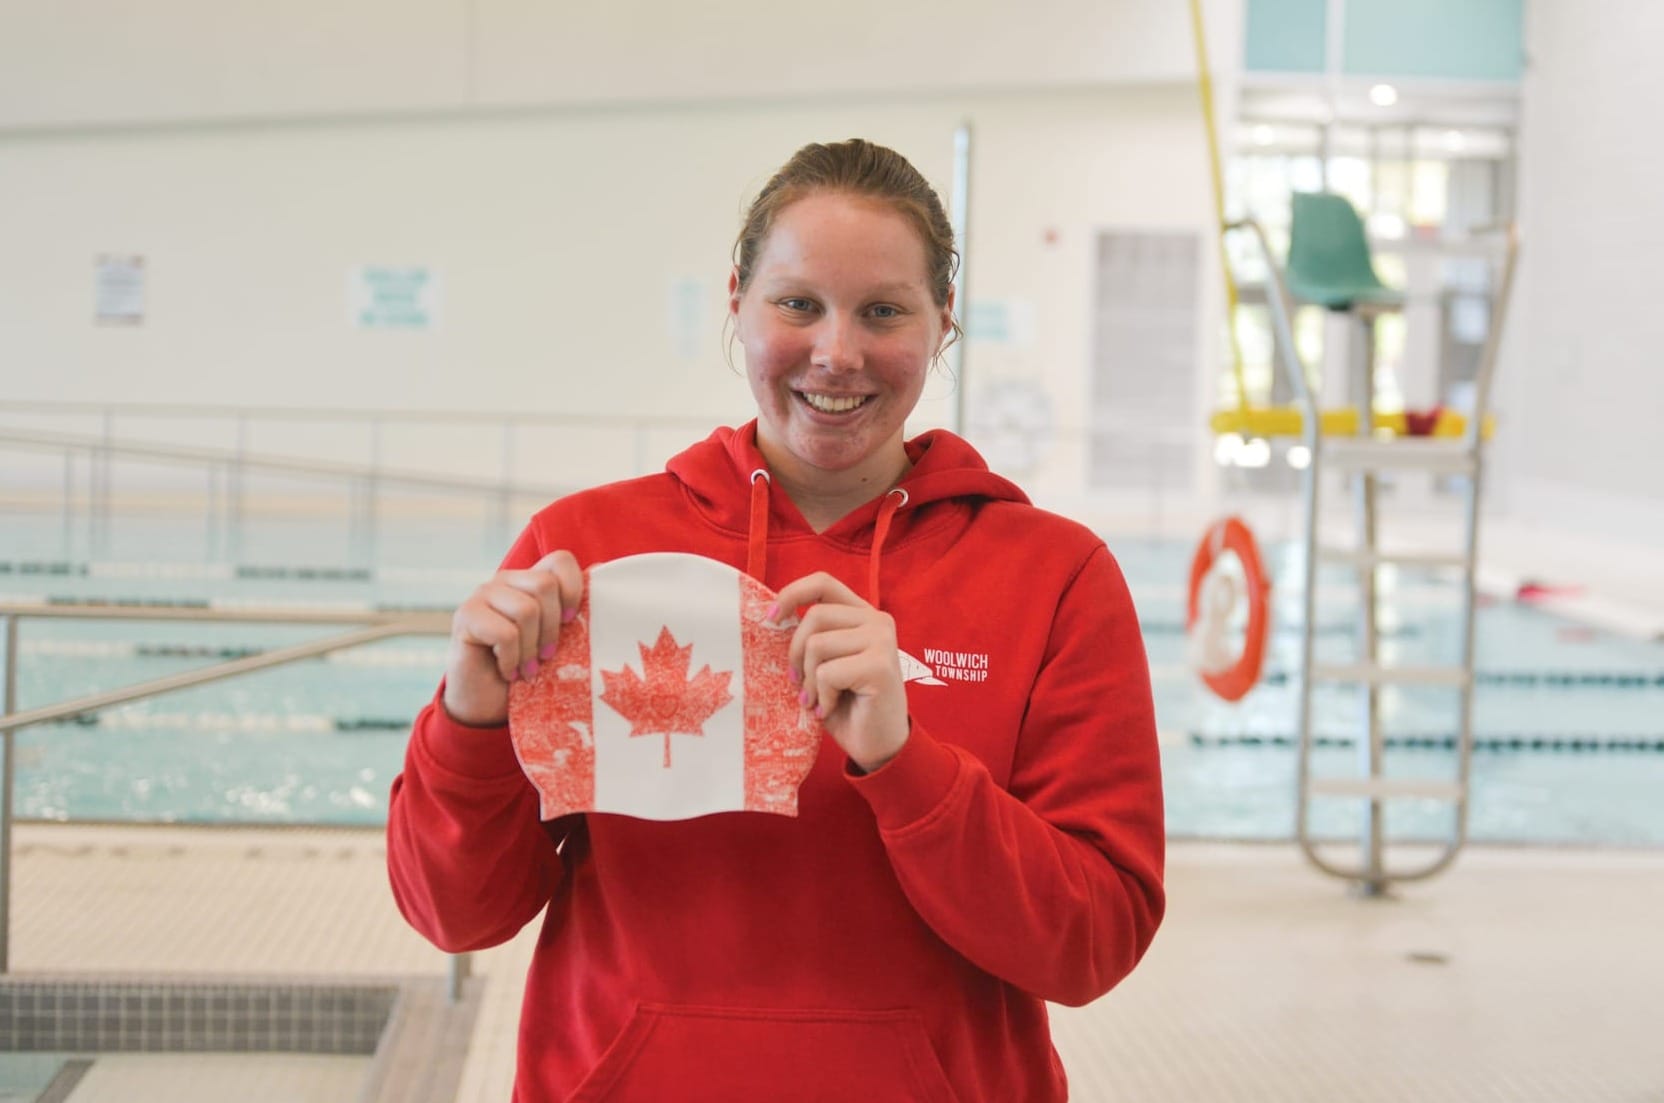 Izzy Speiran named to youth team for Lifesaving World Championships